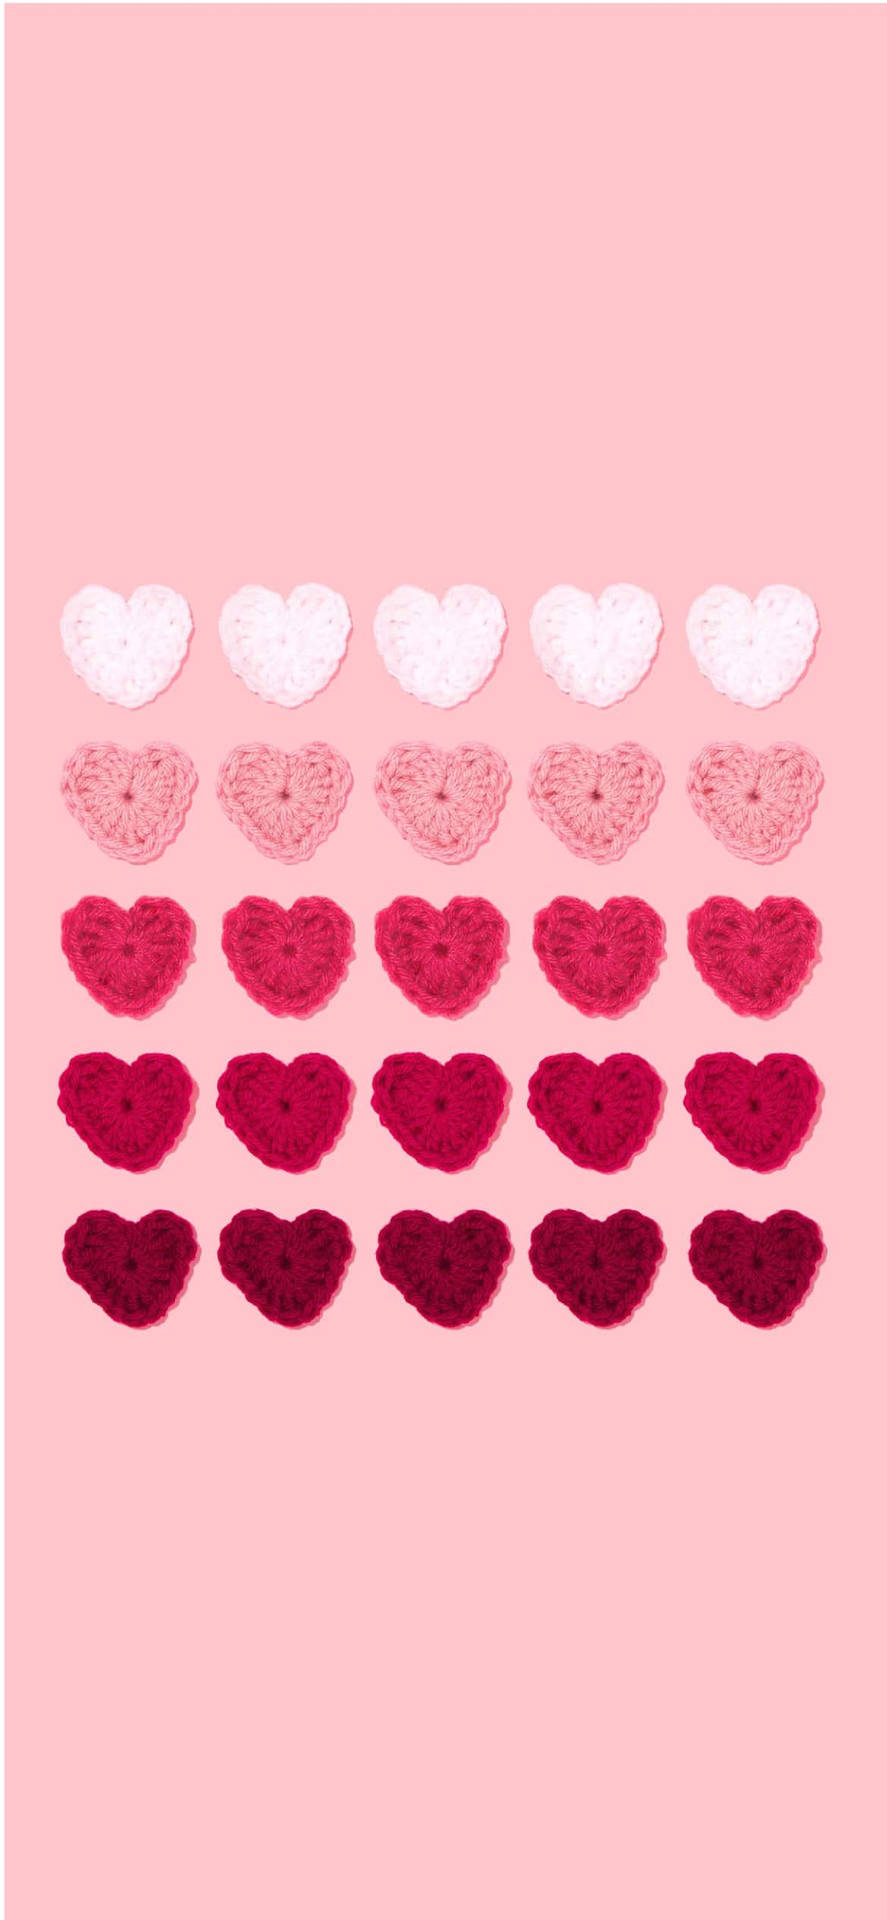 Aesthetic Pink Iphone Embroidered Hearts Background